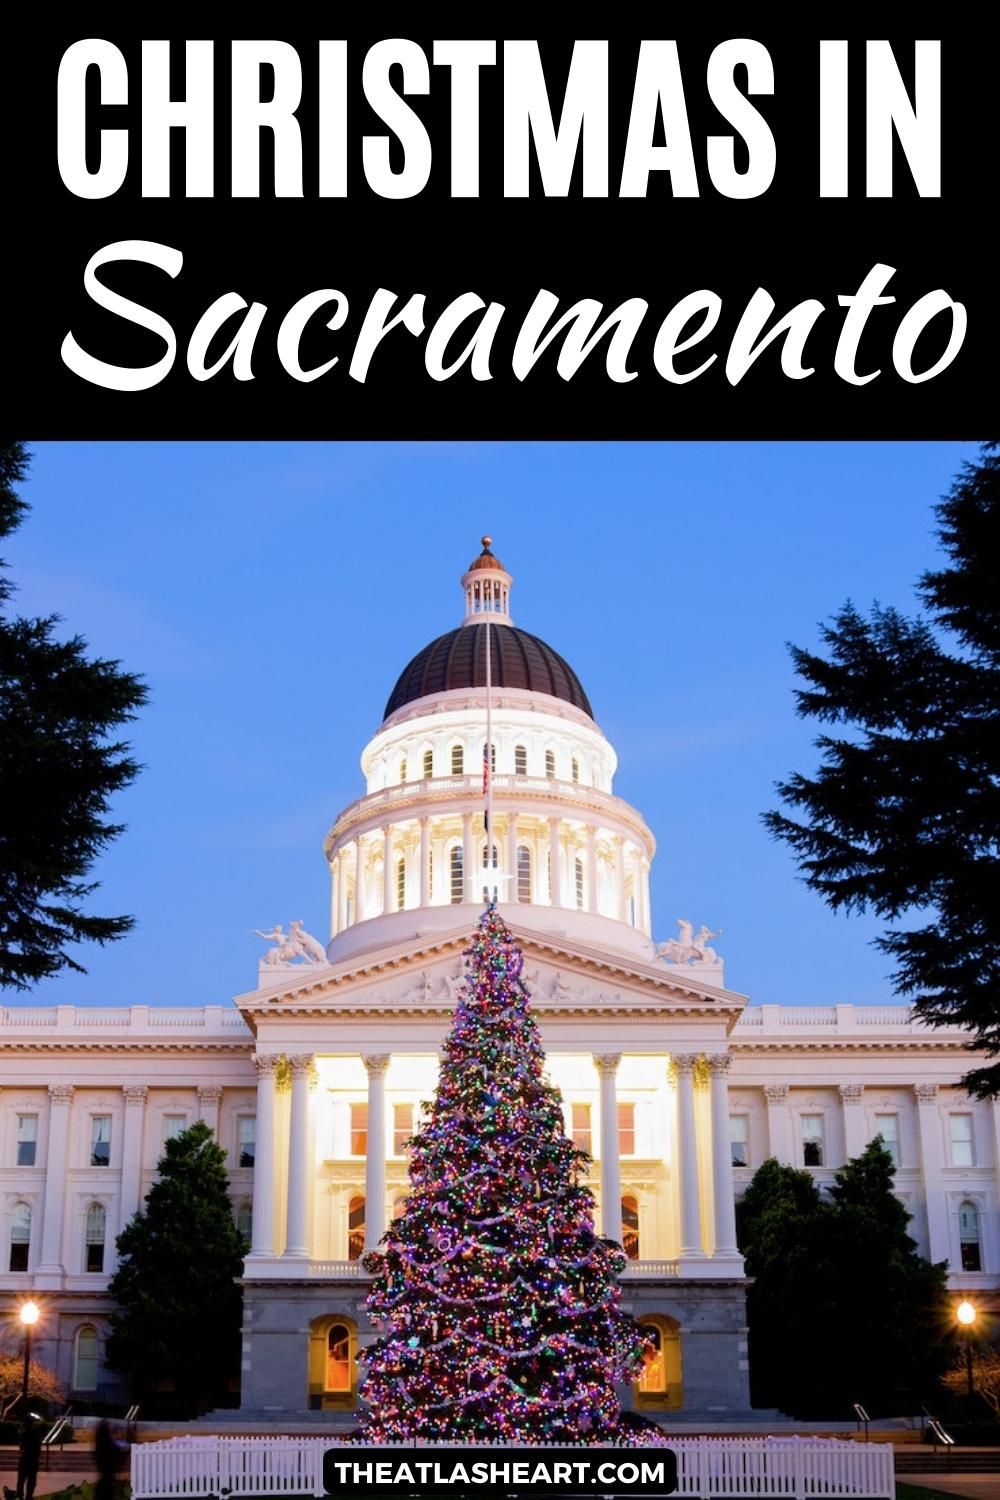 A view of the Capitol Building in the early evening during Christmas in Sacramento, with an illuminated Christmas tree in the foreground, with the text overlay, "Christmas in Sacramento."